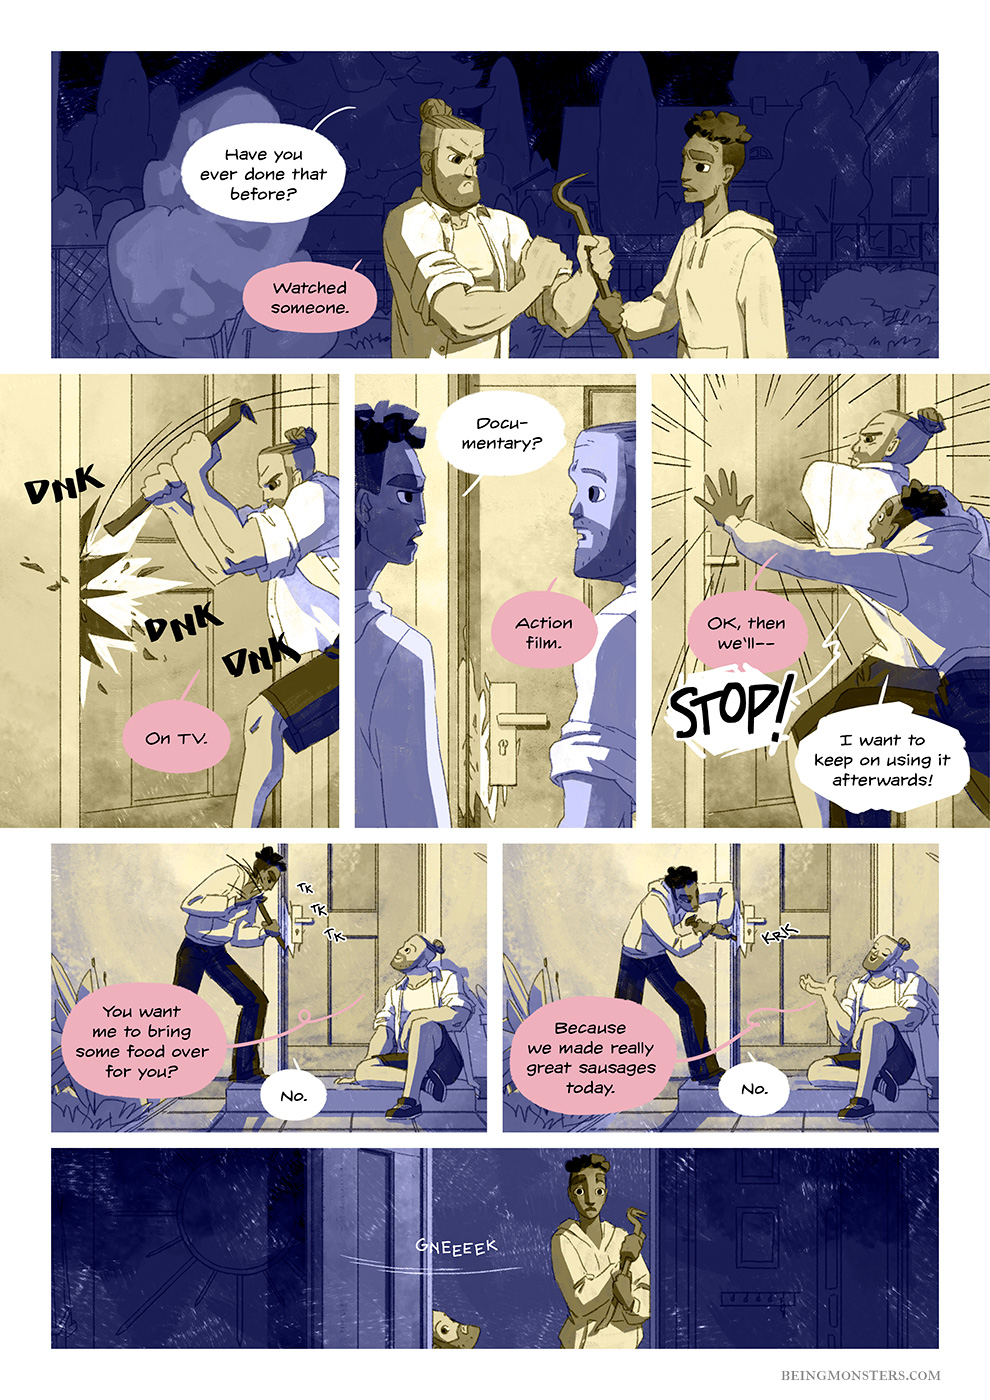 Being Monsters Book 1 Chapter 4 page 34 EN